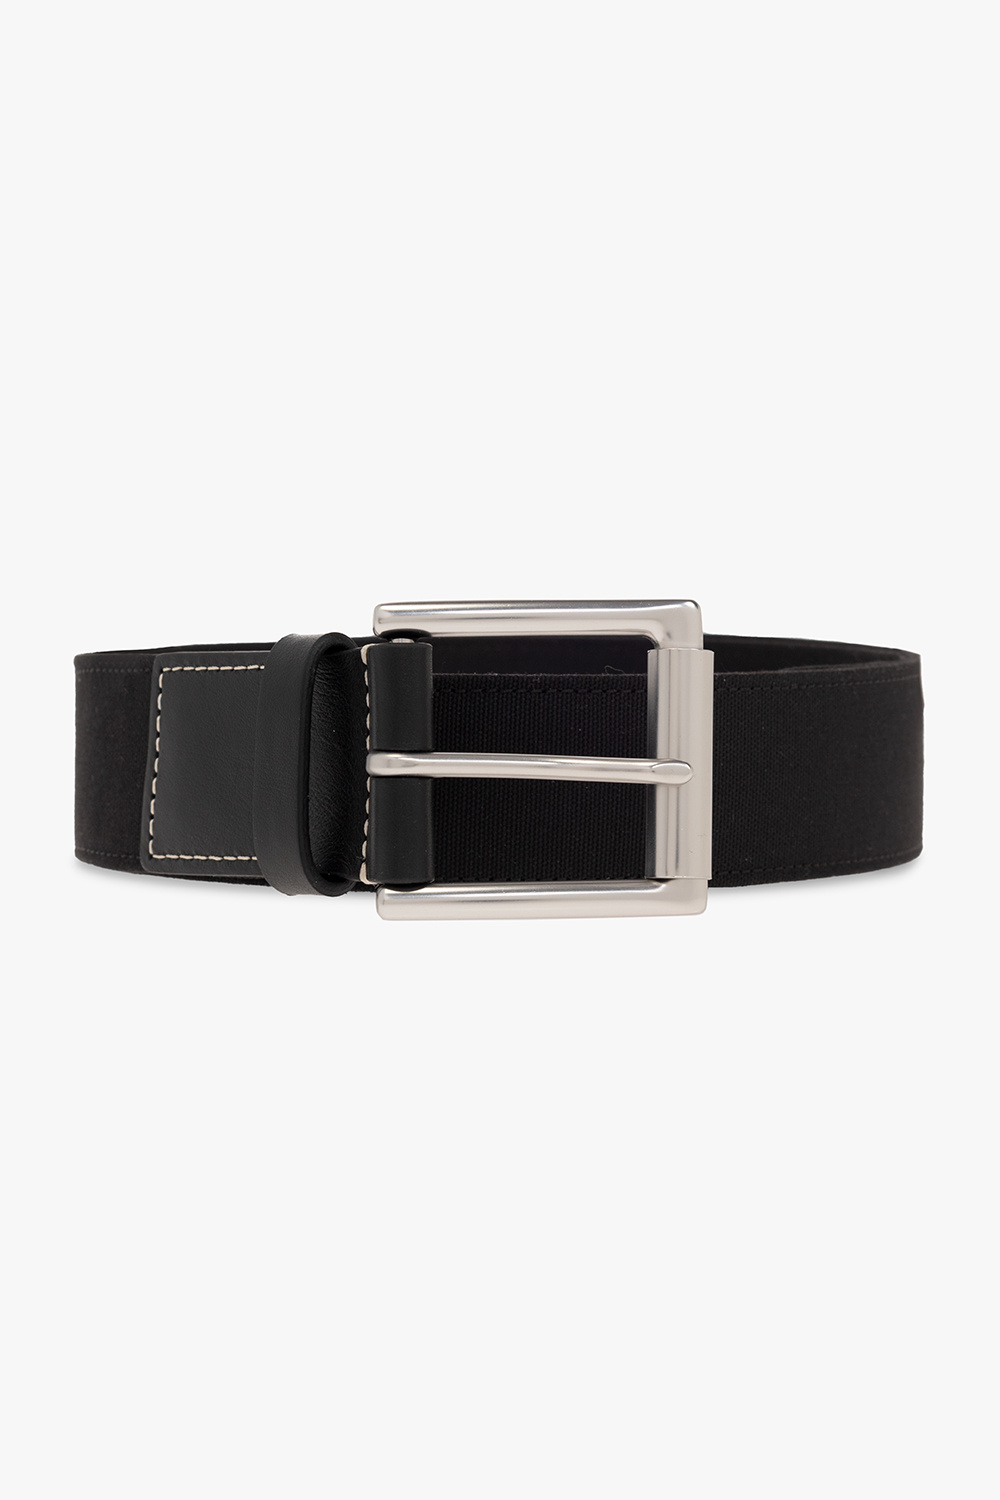 EARN THE TITLE OF THE BEST DRESSED GUEST Belt with zebra motif